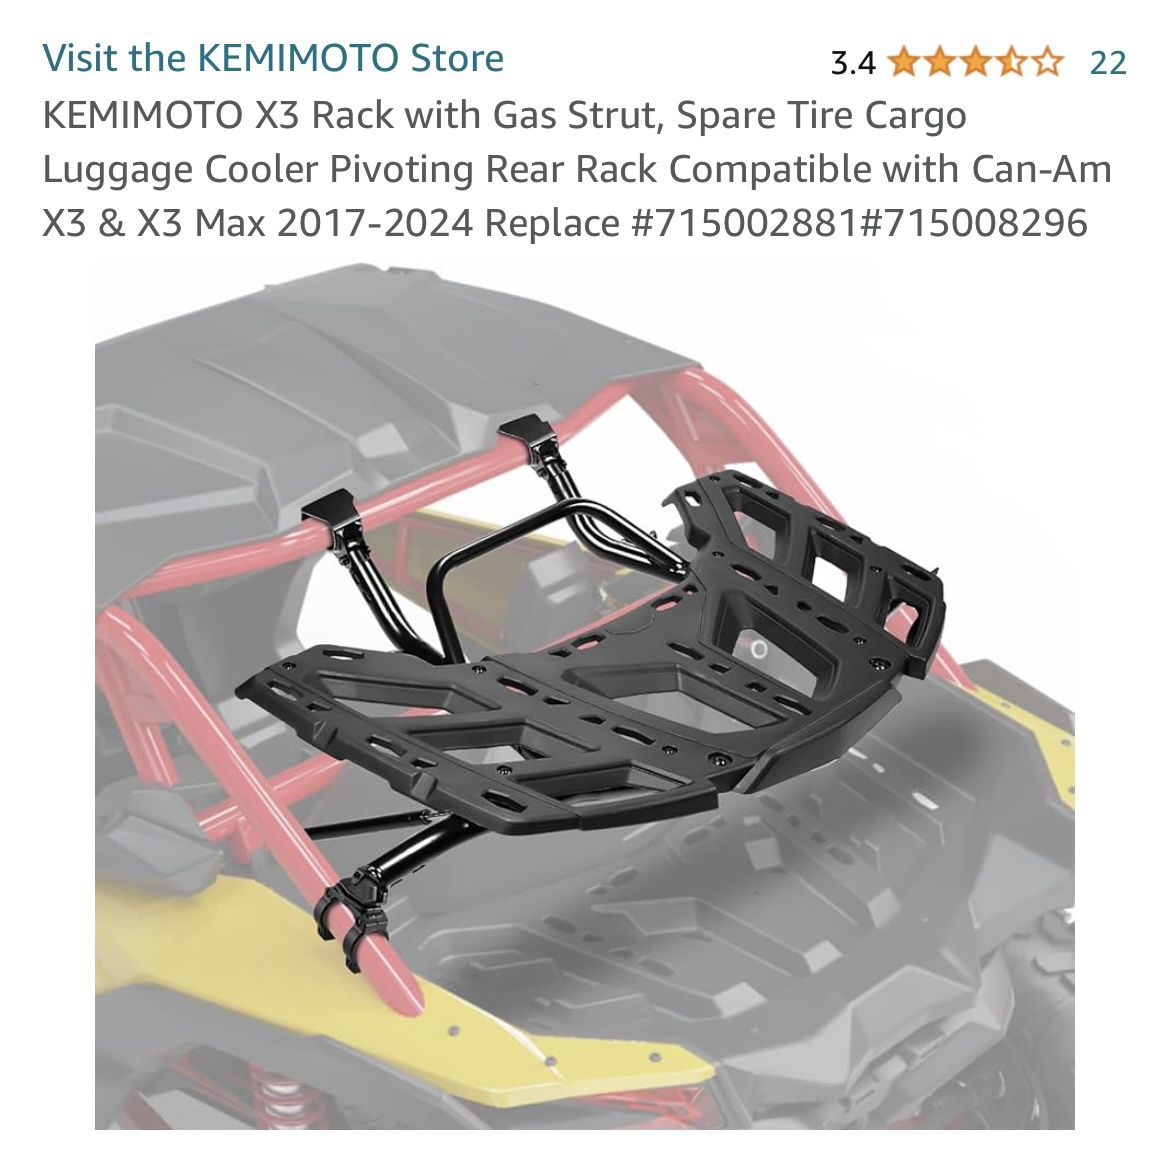 KEMIMOTO X3 Rack with Gas Strut, Spare Tire Cargo Luggage Cooler Pivoting Rear Rack Compatible with Can-Am X3 & X3 Max 2017-2024 